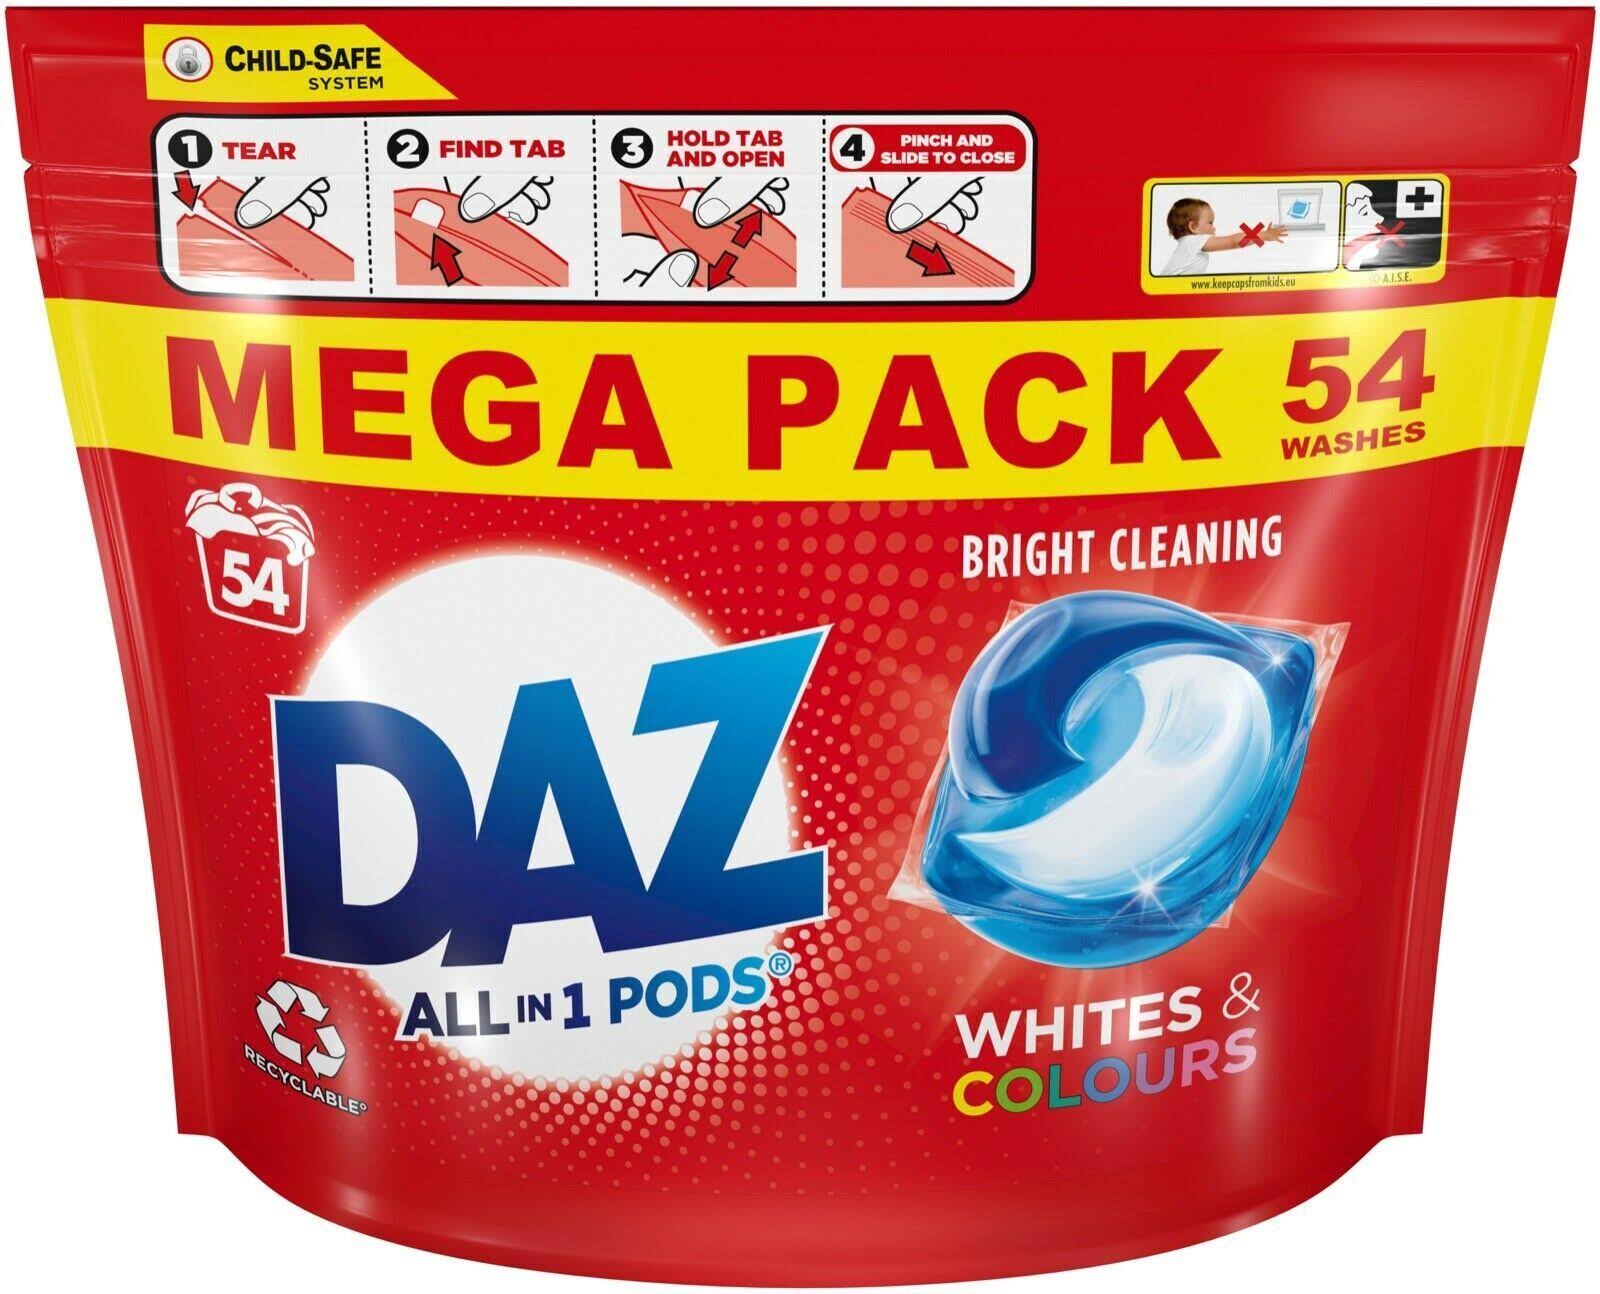 Daz All-in-1 Pods Washing Liquid Capsules Whites & Colours 54 Washes